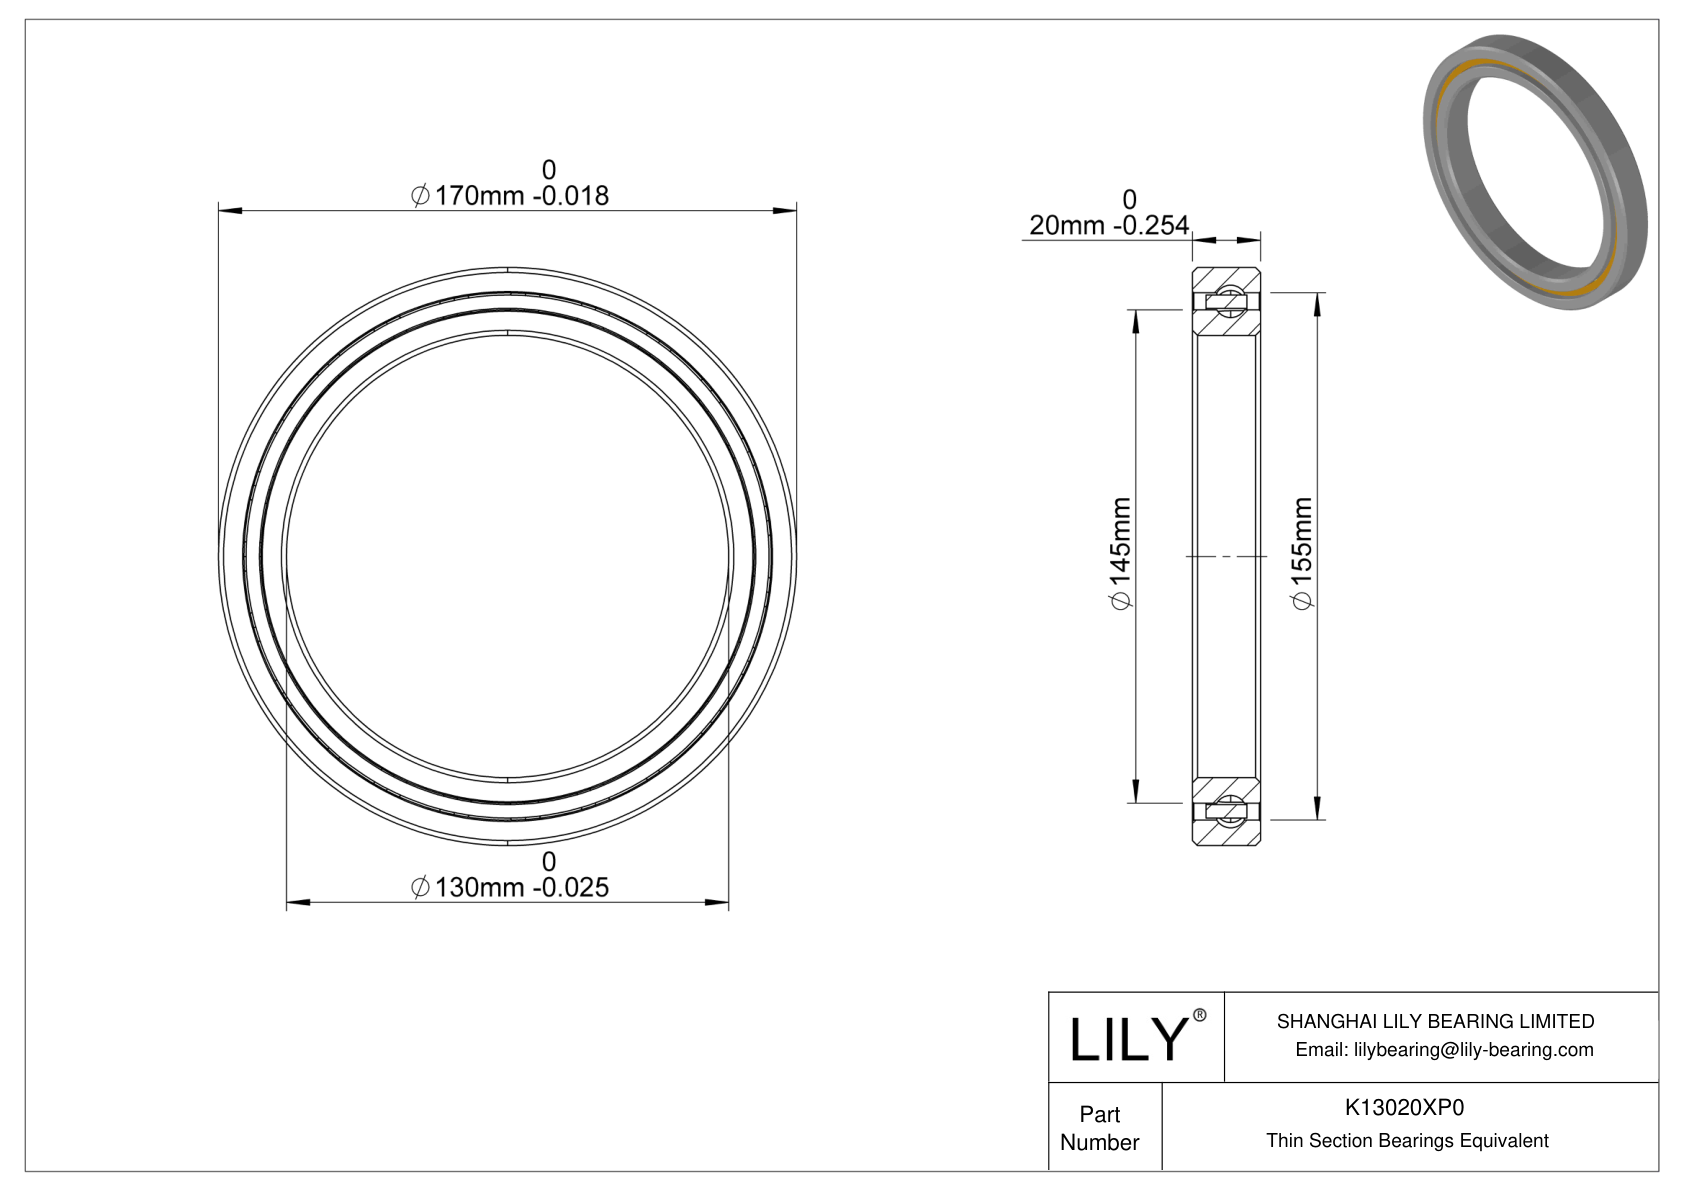 K13020XP0 Constant Section (CS) Bearings cad drawing